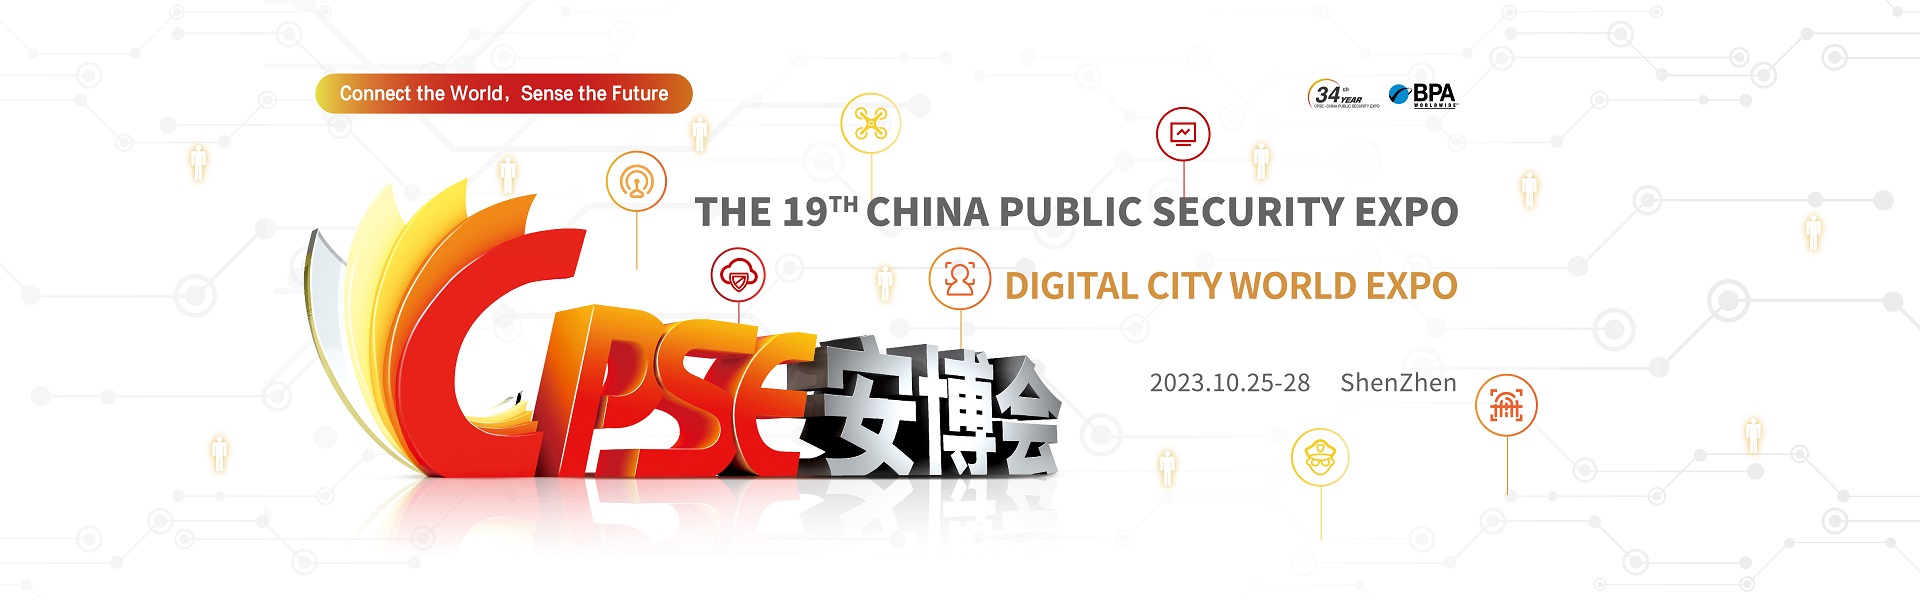 The 19th CPSE in Shenzhen from October 2 to 28,2023